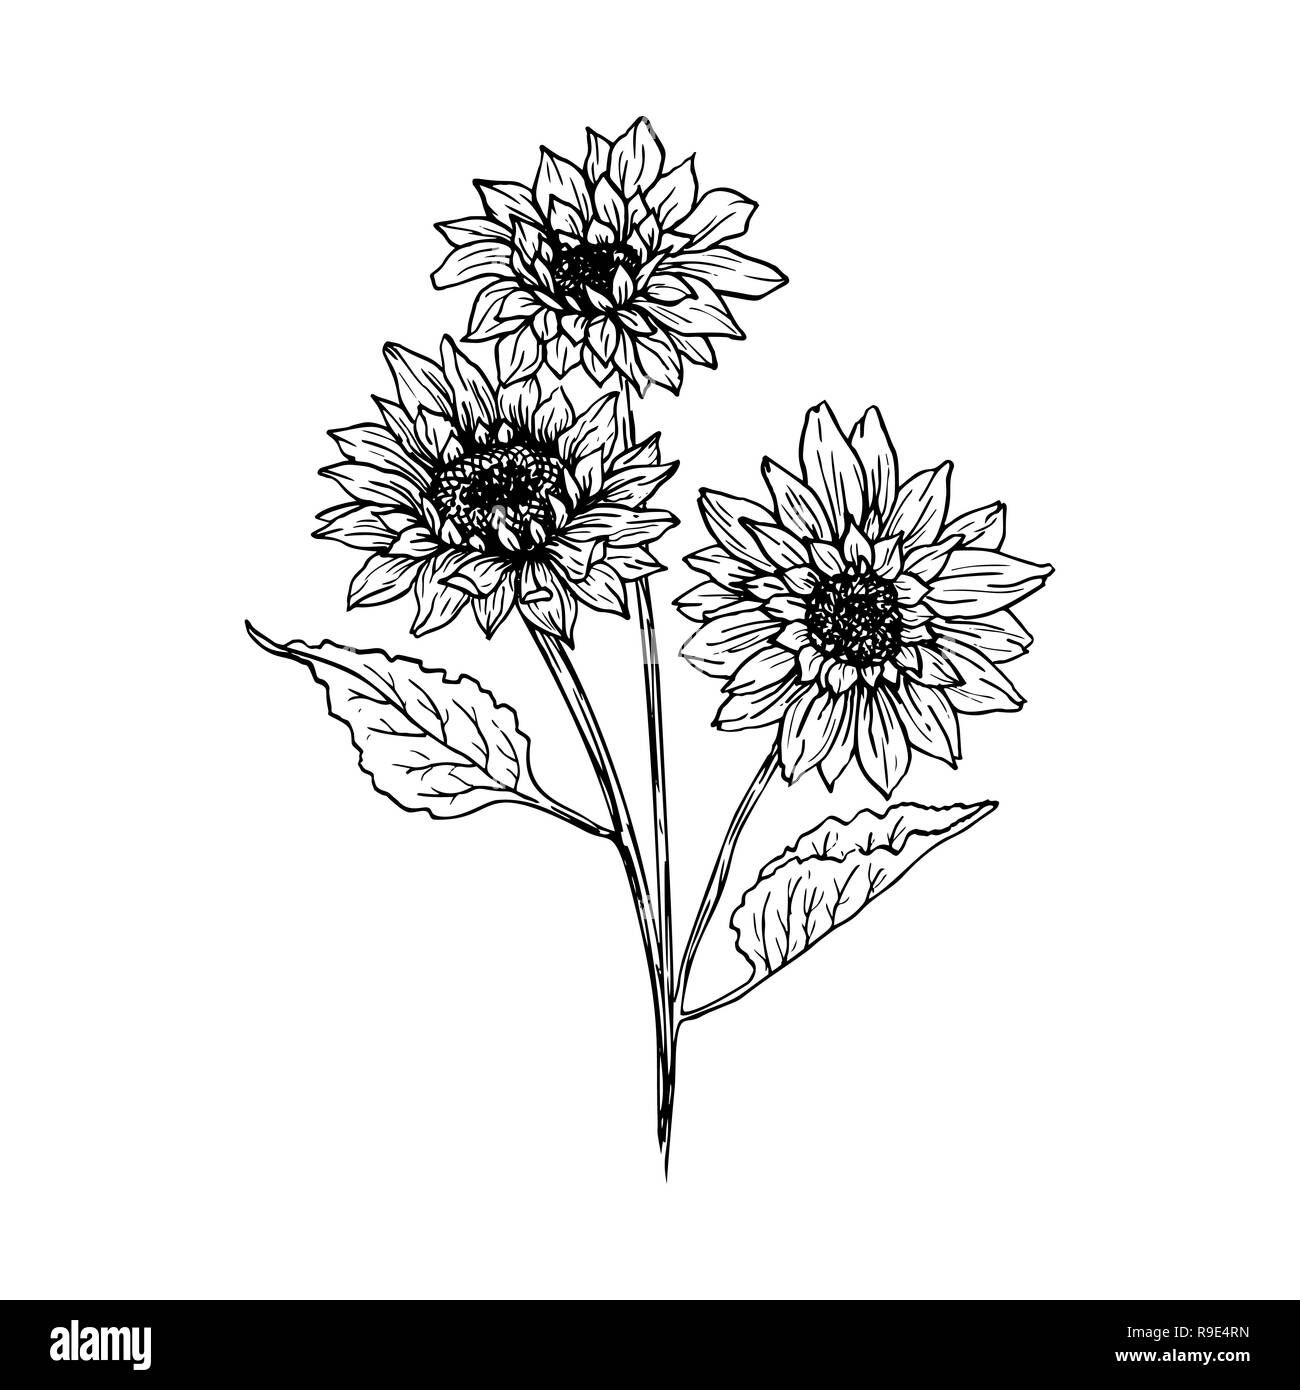 Sunflower Drawing ➤ How to draw a Sunflower